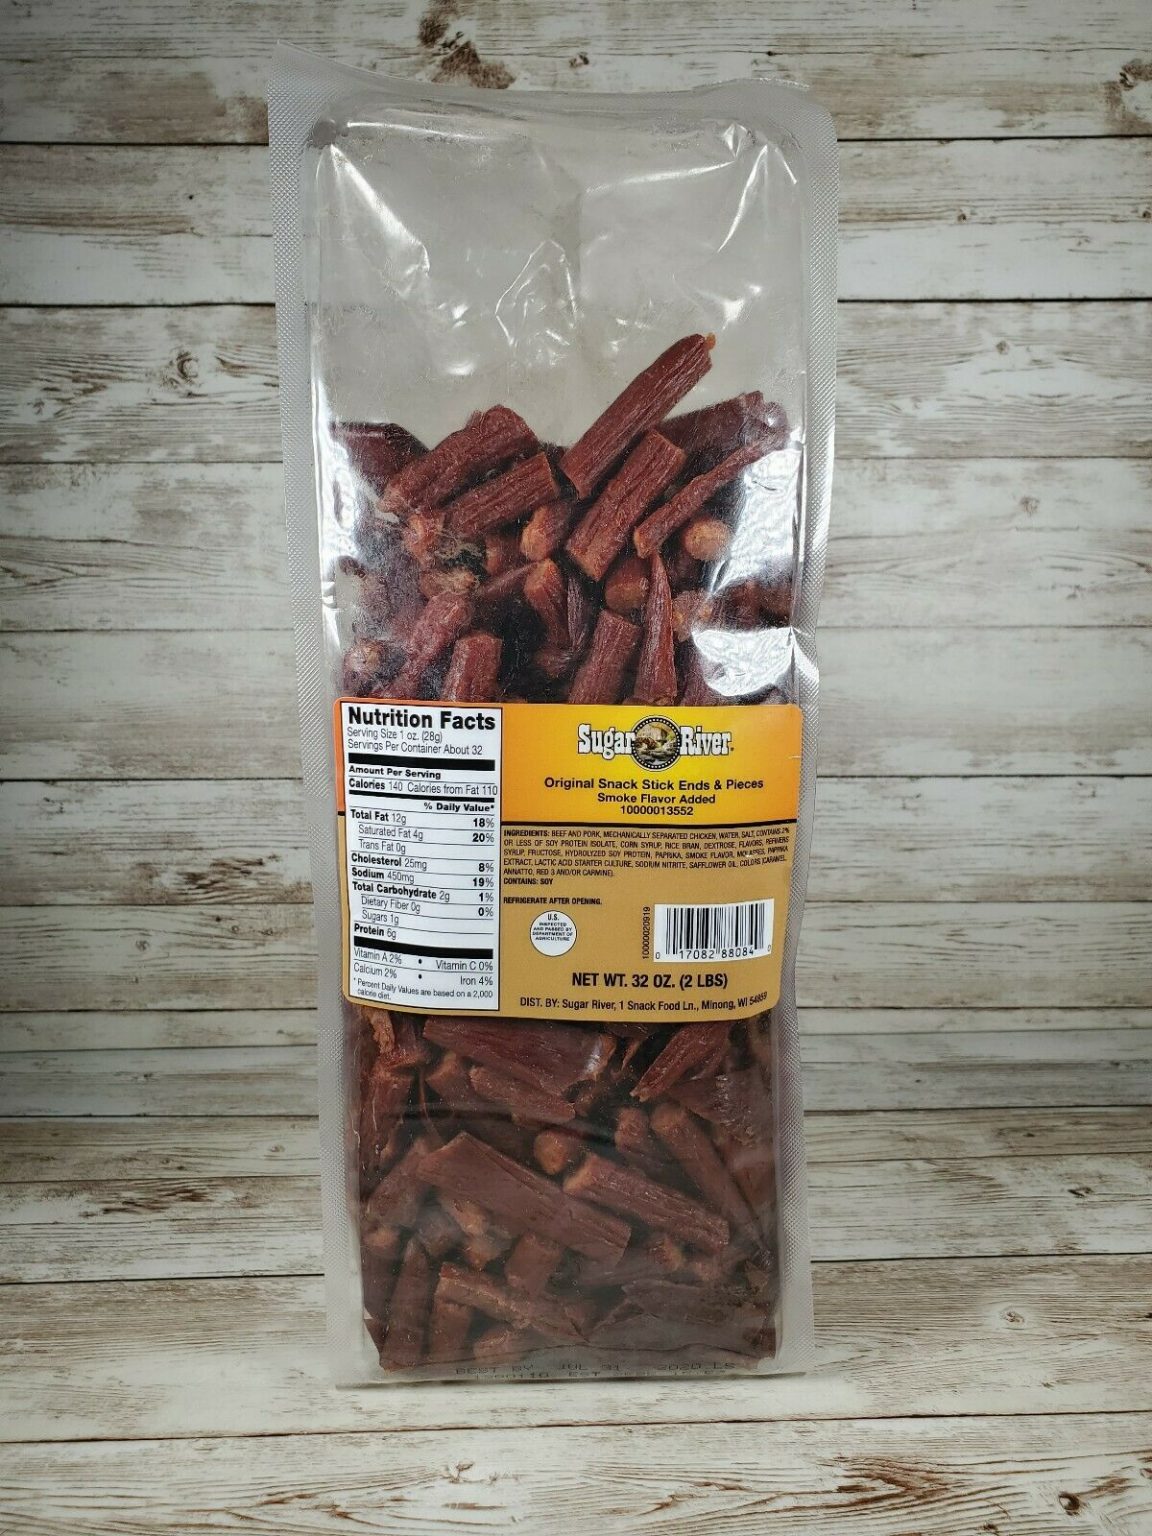 Sugar River Brand Meat Snack Sticks Ends & Pieces Original or Hot Two